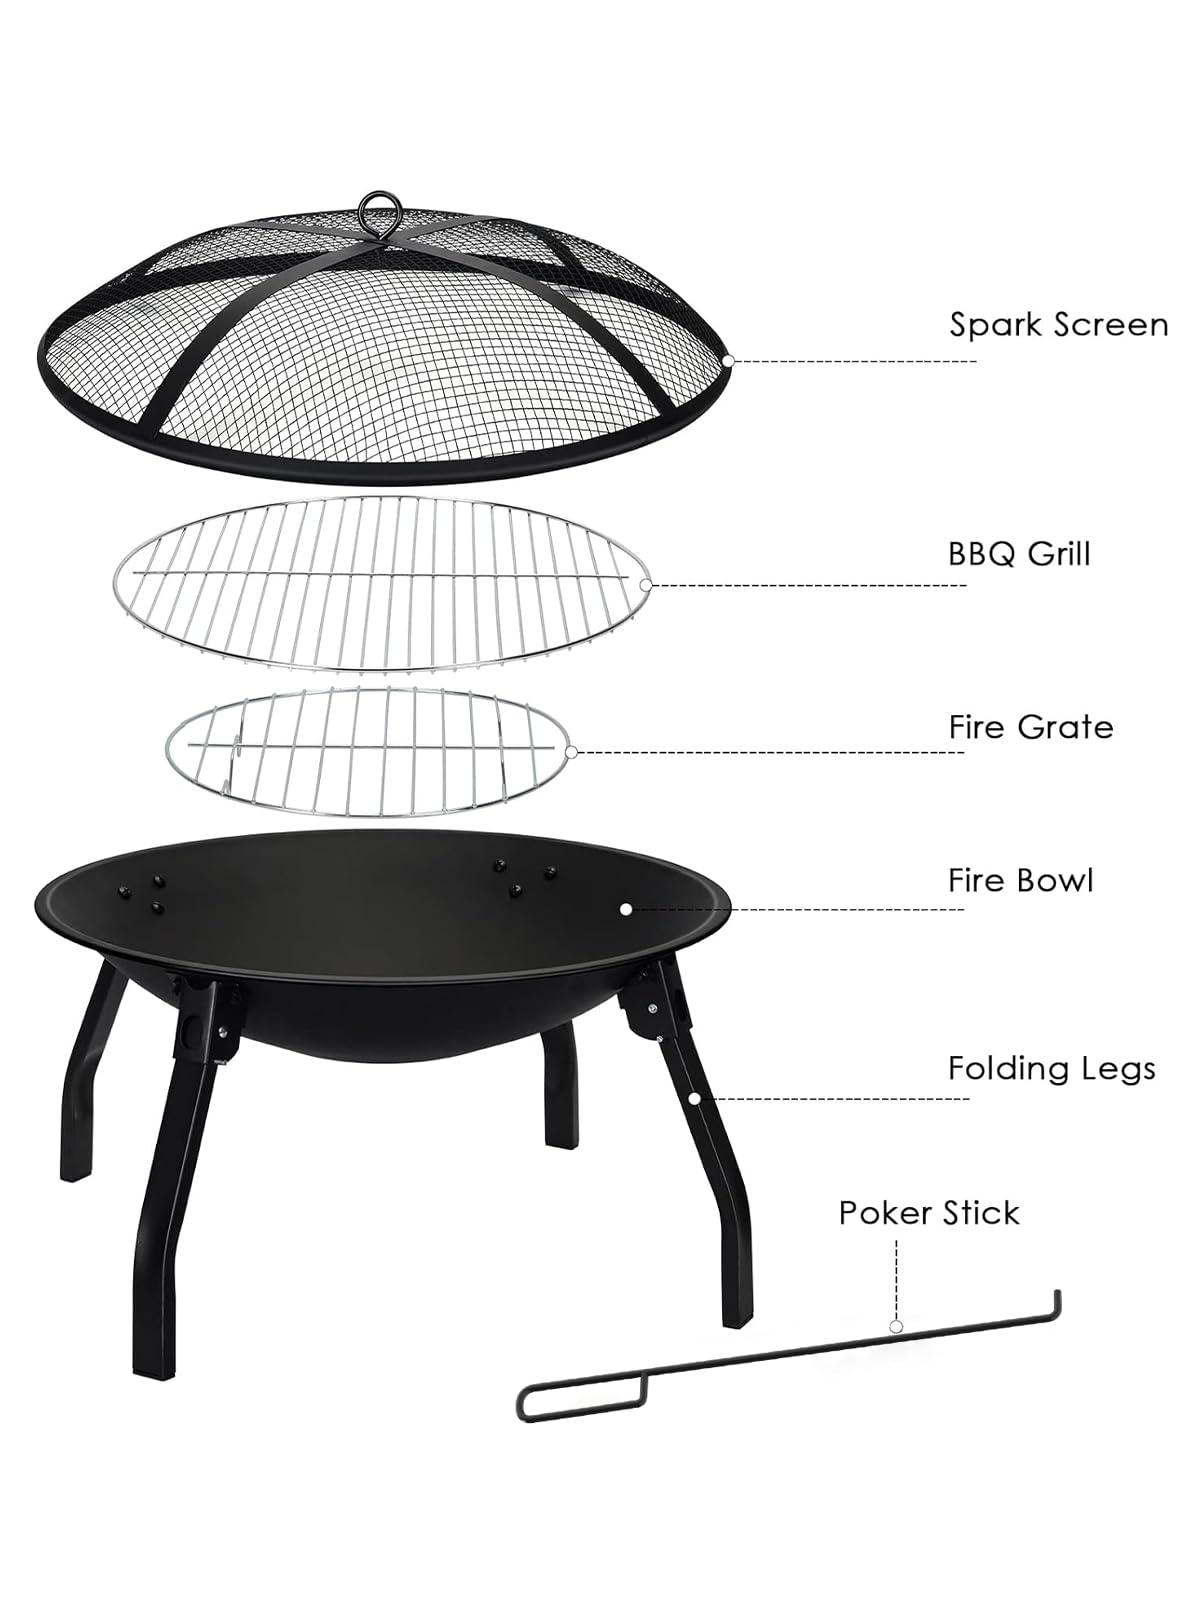 PROUS Outdoor Fire Pit, 22in Foldable Wood Burning Fire Pit, Portable Fire Pit for Camping with Carry Bag, Spark Screen & Poker, Pack Grill, Folding Legs for Camping, Picnic, Bonfire - CookCave